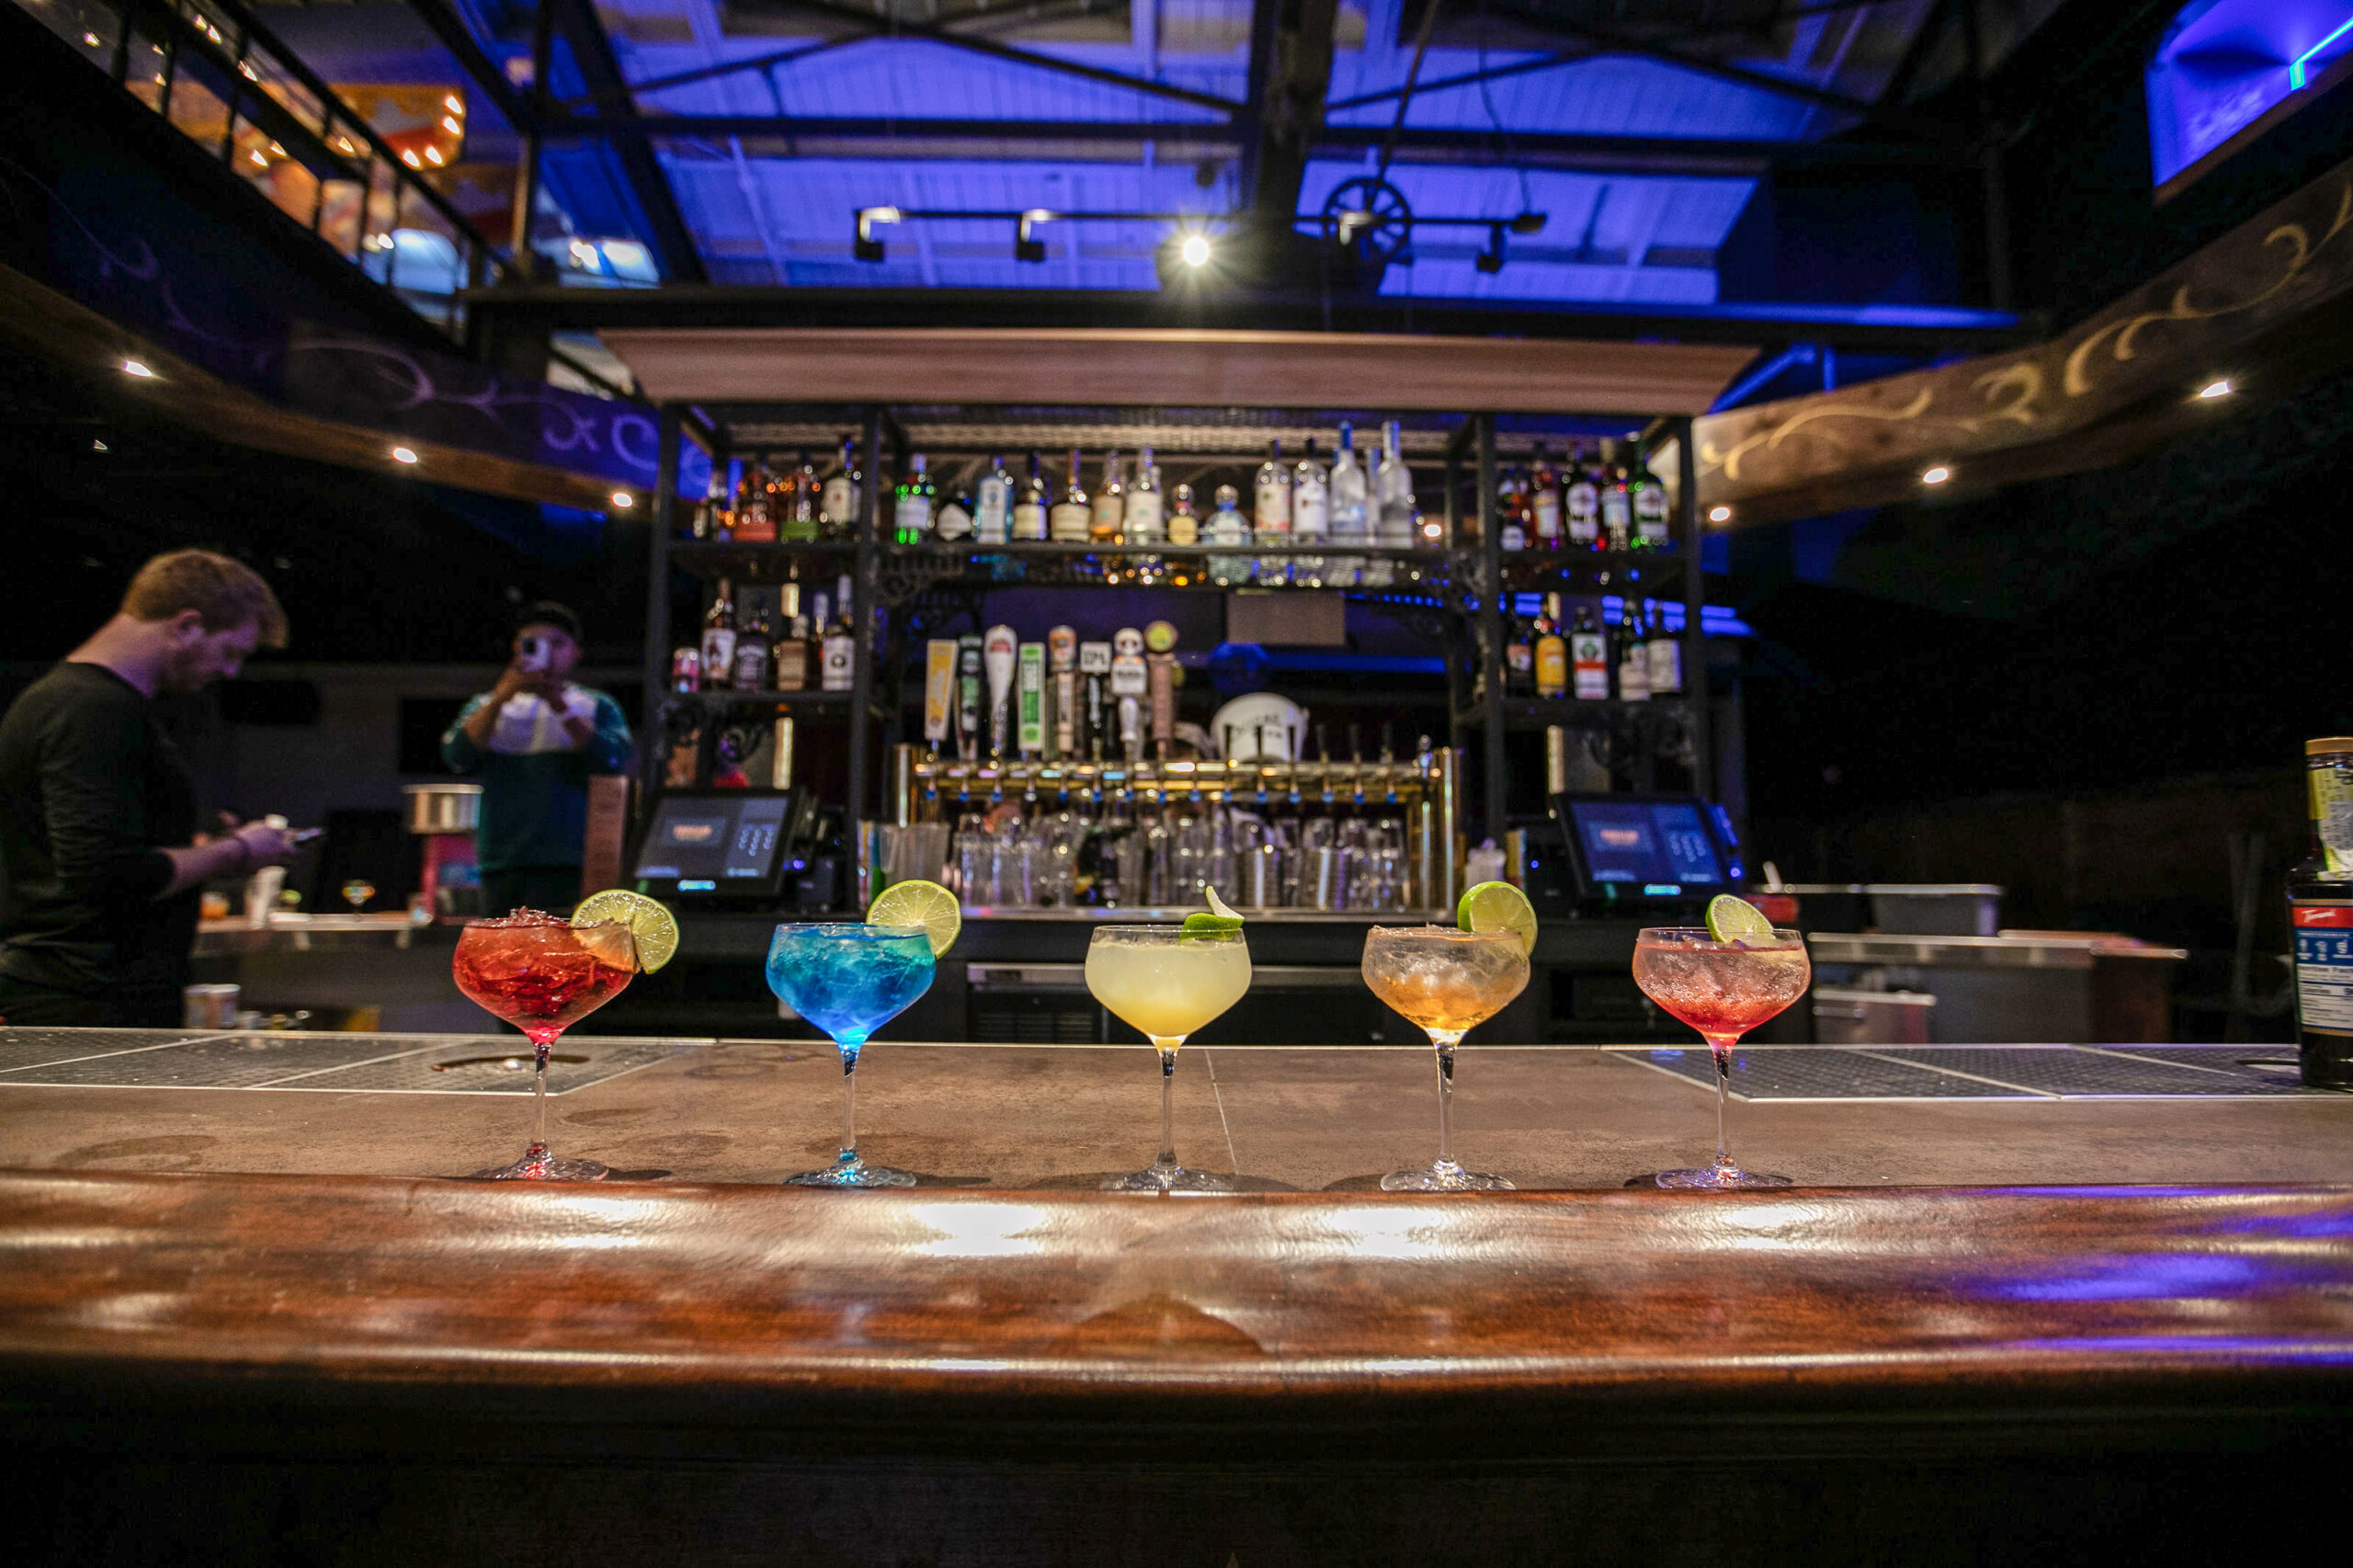 Let the Good Times Roll: SF Nightlife Hopeful as Bars and Venues Fill Again